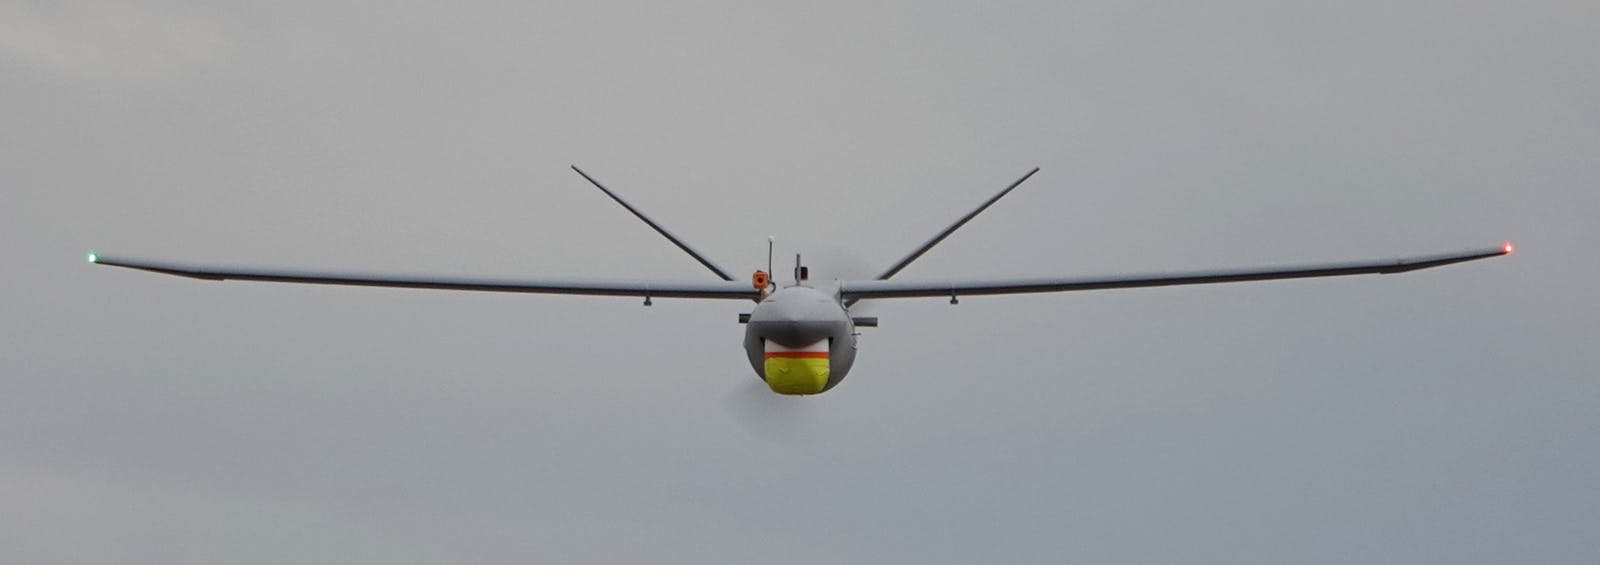 The M2 UAS in action during a long endurance flight test